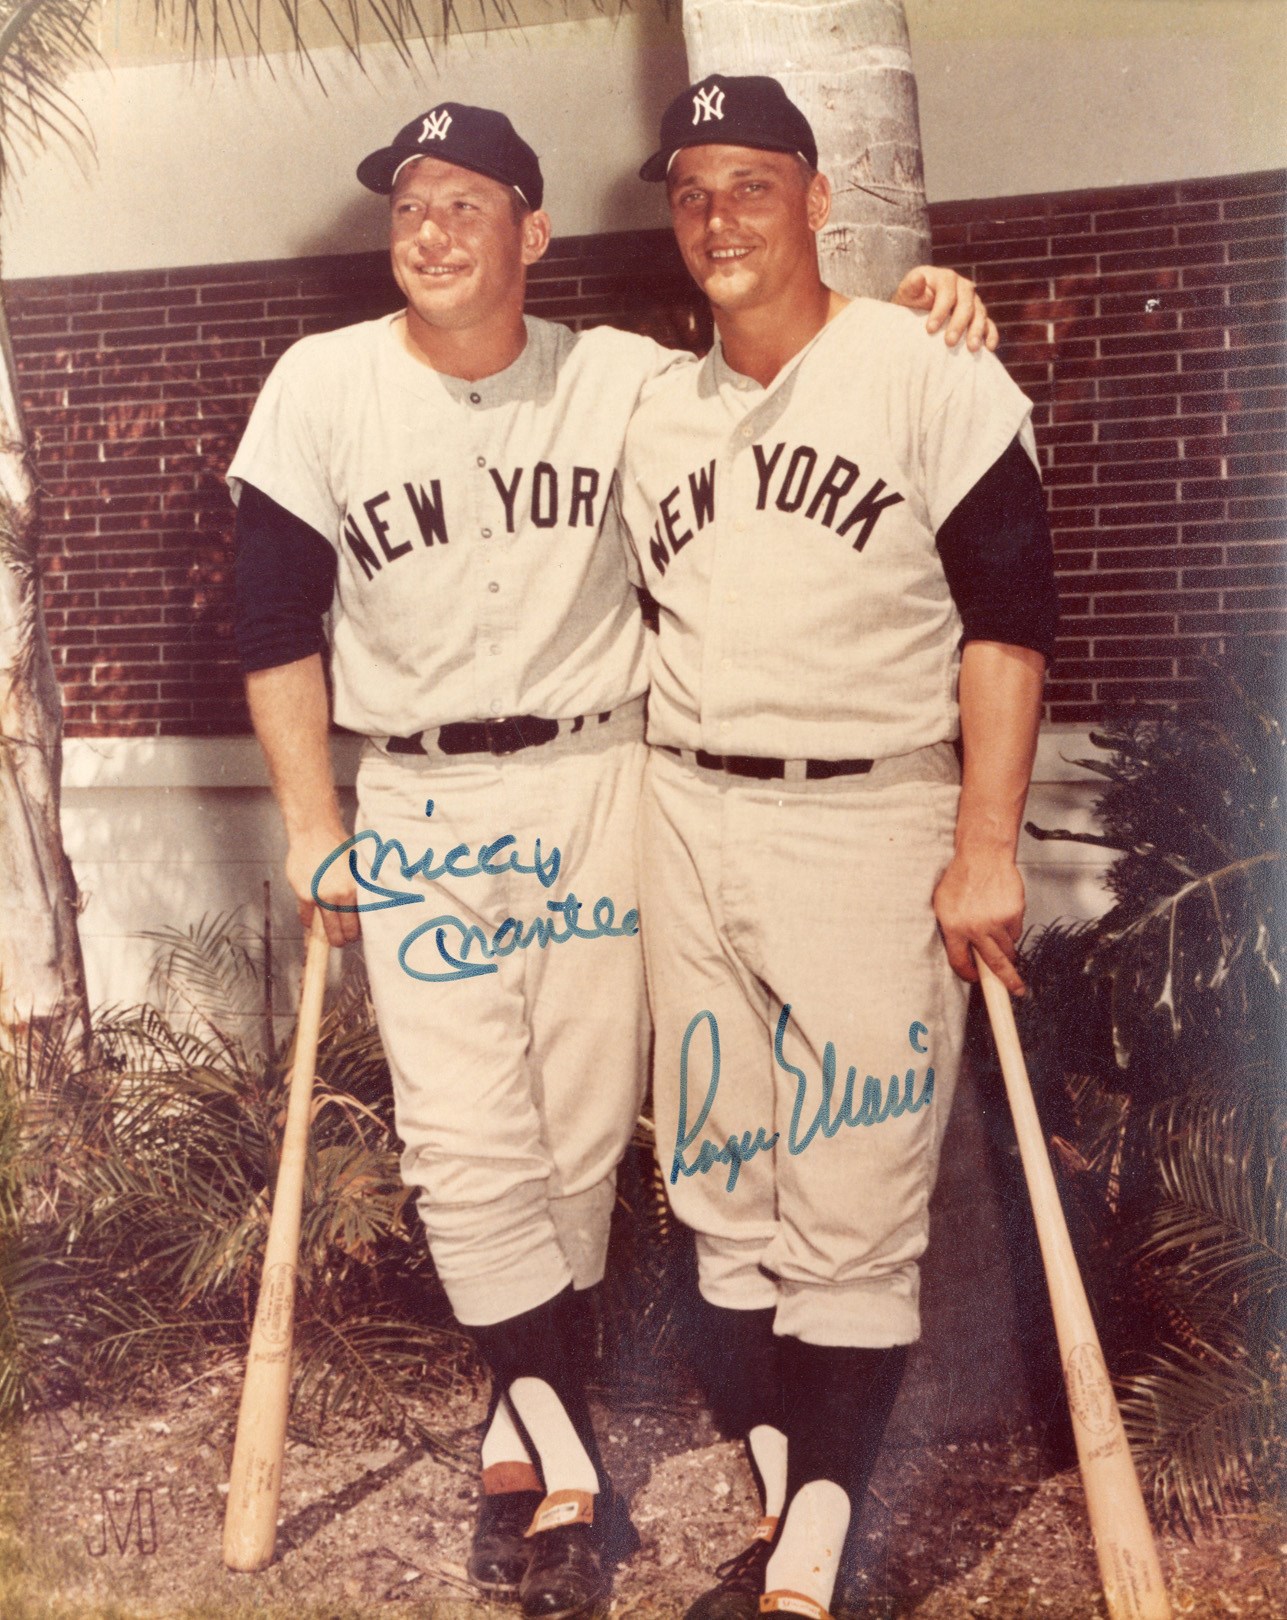 Mantle and Maris - Mickey Mantle and Roger Maris Signed Photograph (JSA)